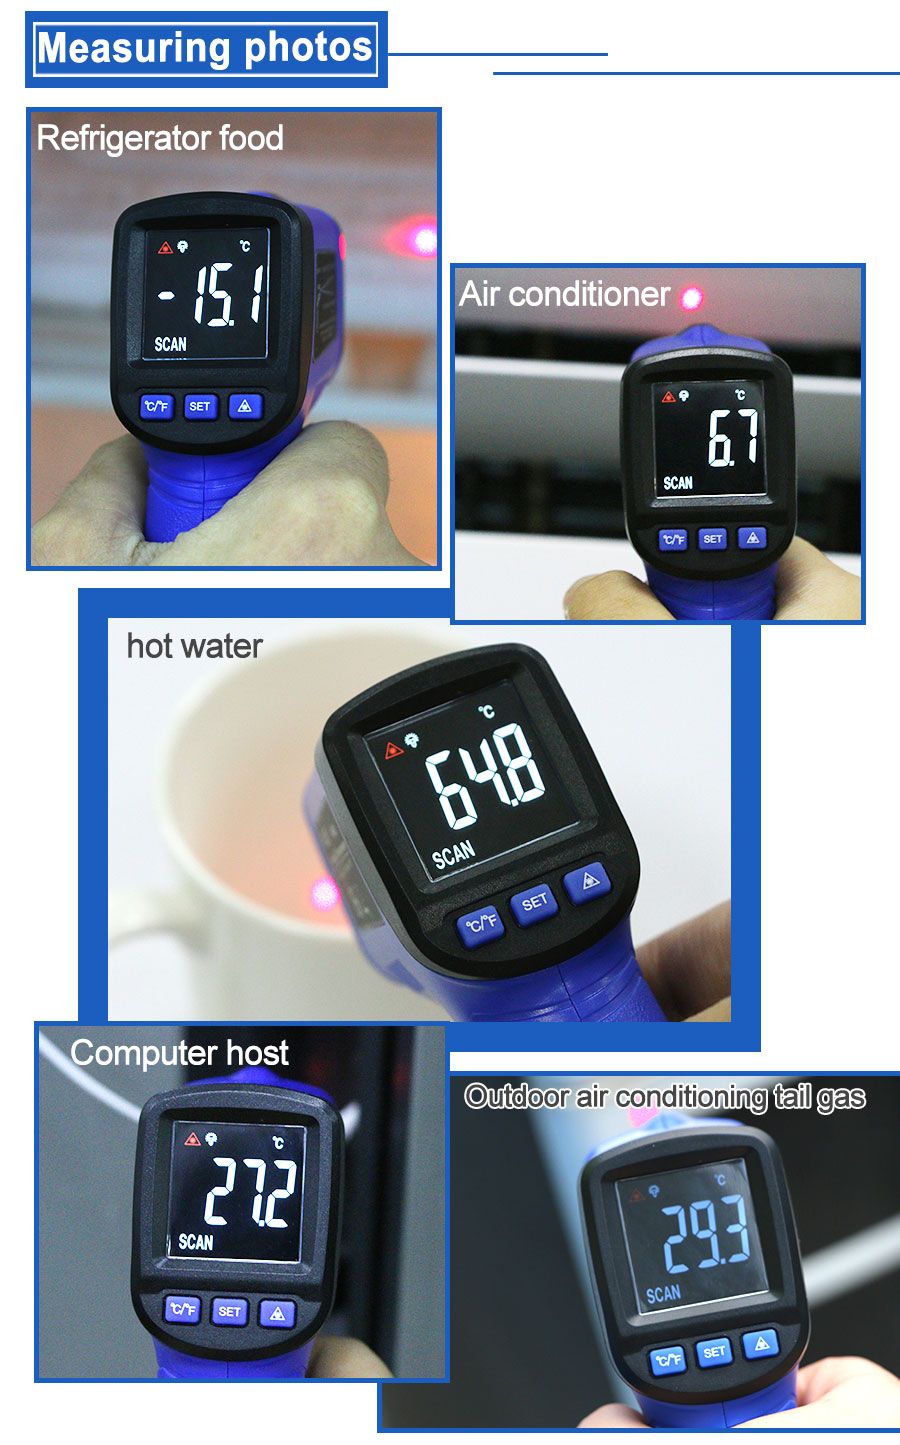 FLUS-IR-88--50380---58716-Non-contact-IR-Thermometer-Digital-Infrared-Thermometer-Handheld-Portable--1767439